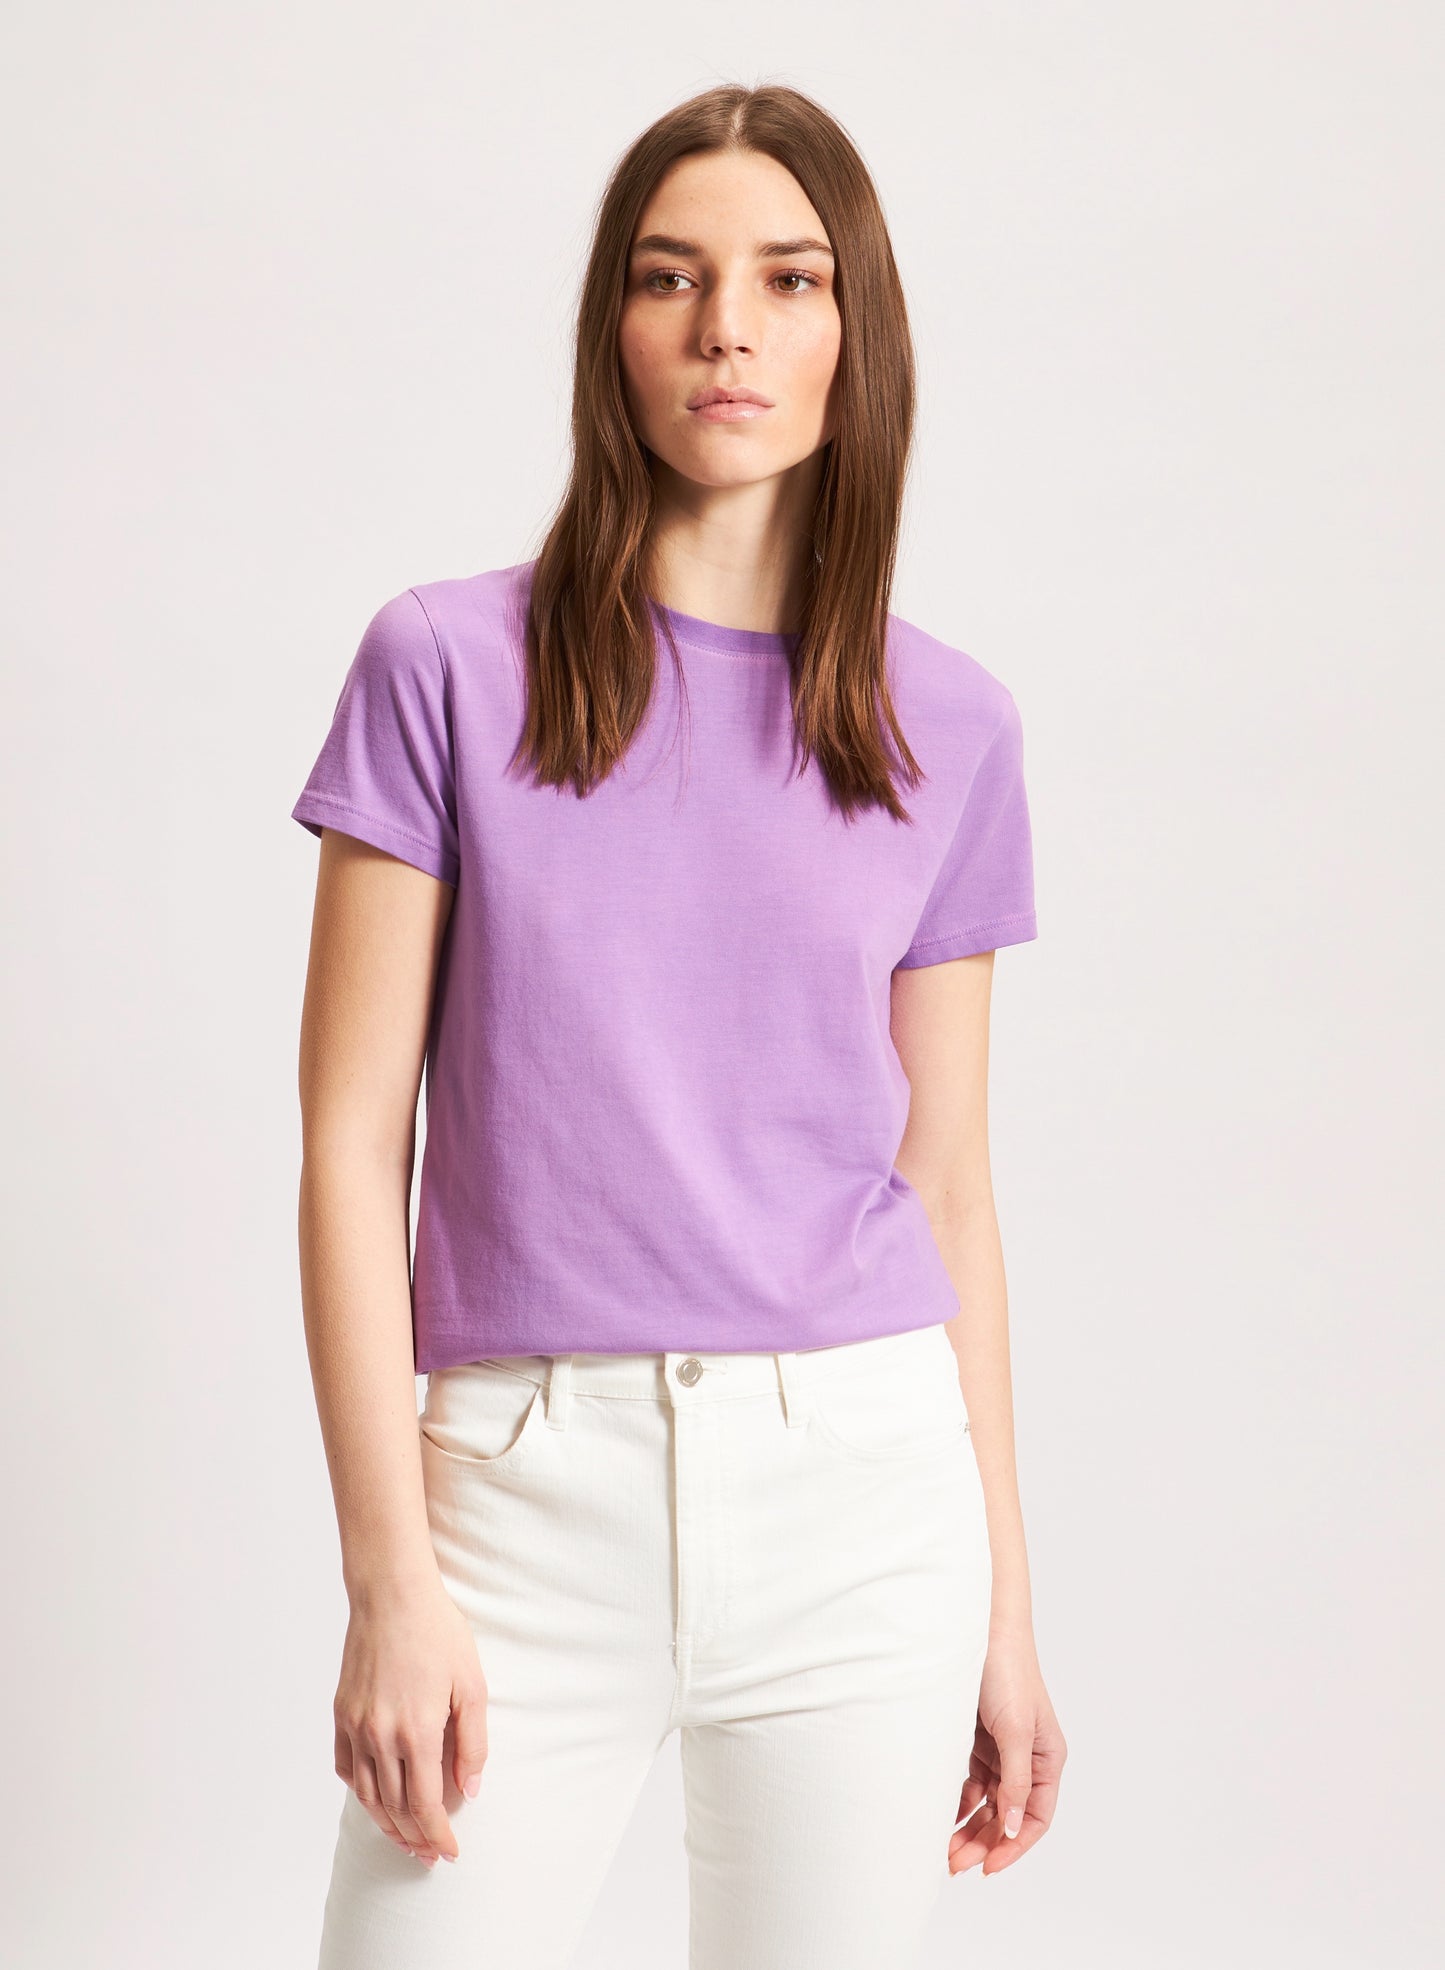 Patrick Assaraf Iconic Sublime Crew Tee in Thistle